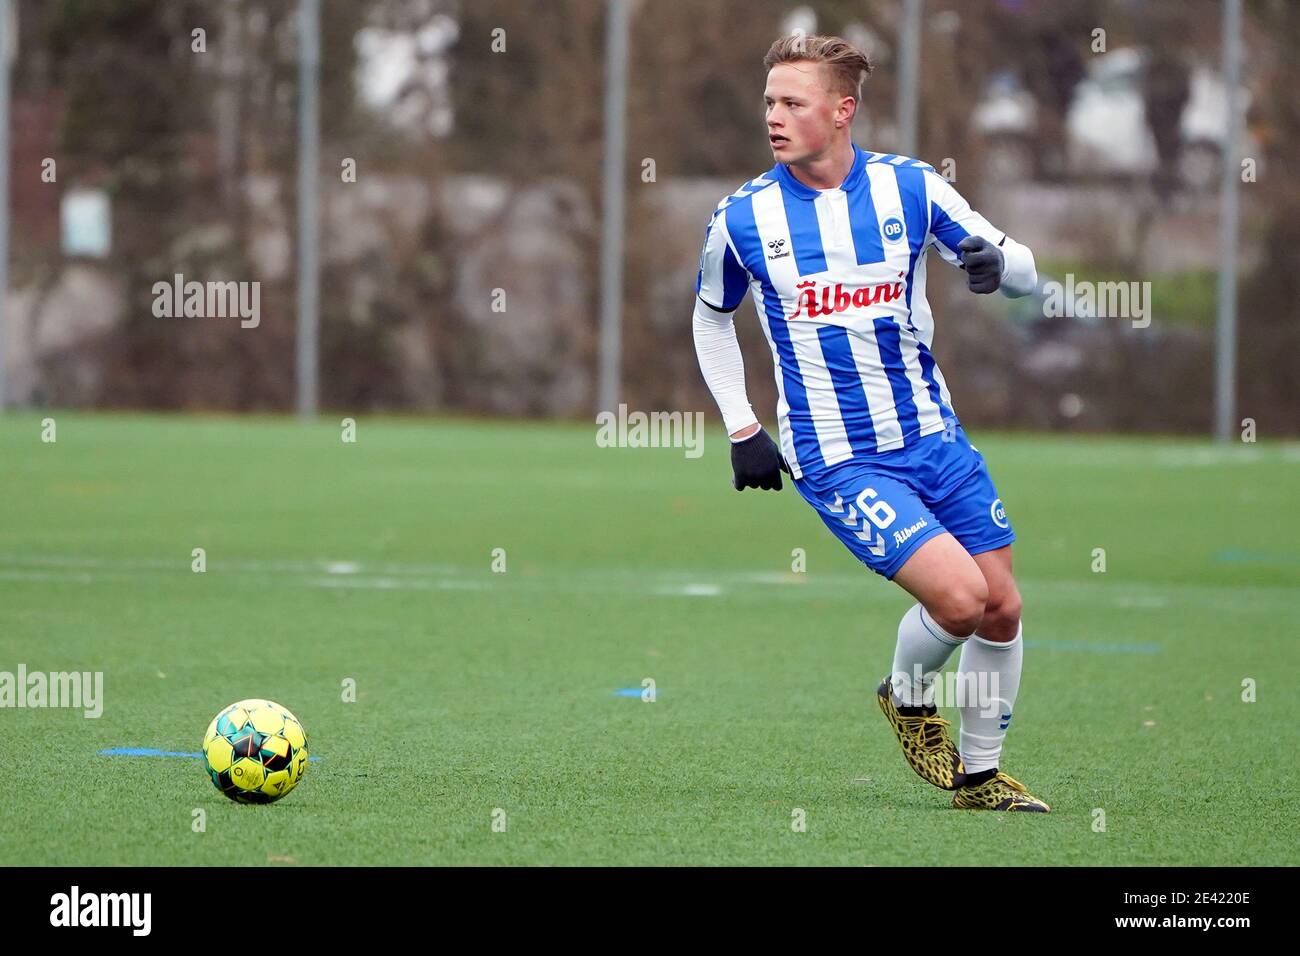 Odense, Denmark. 21st Jan, 2021. Jeppe Tverskov (6) of OB seen during a  test match between Odense Boldklub and Esbjerg fB at the training ground of  Odense Boldklub in Odense. (Photo Credit: